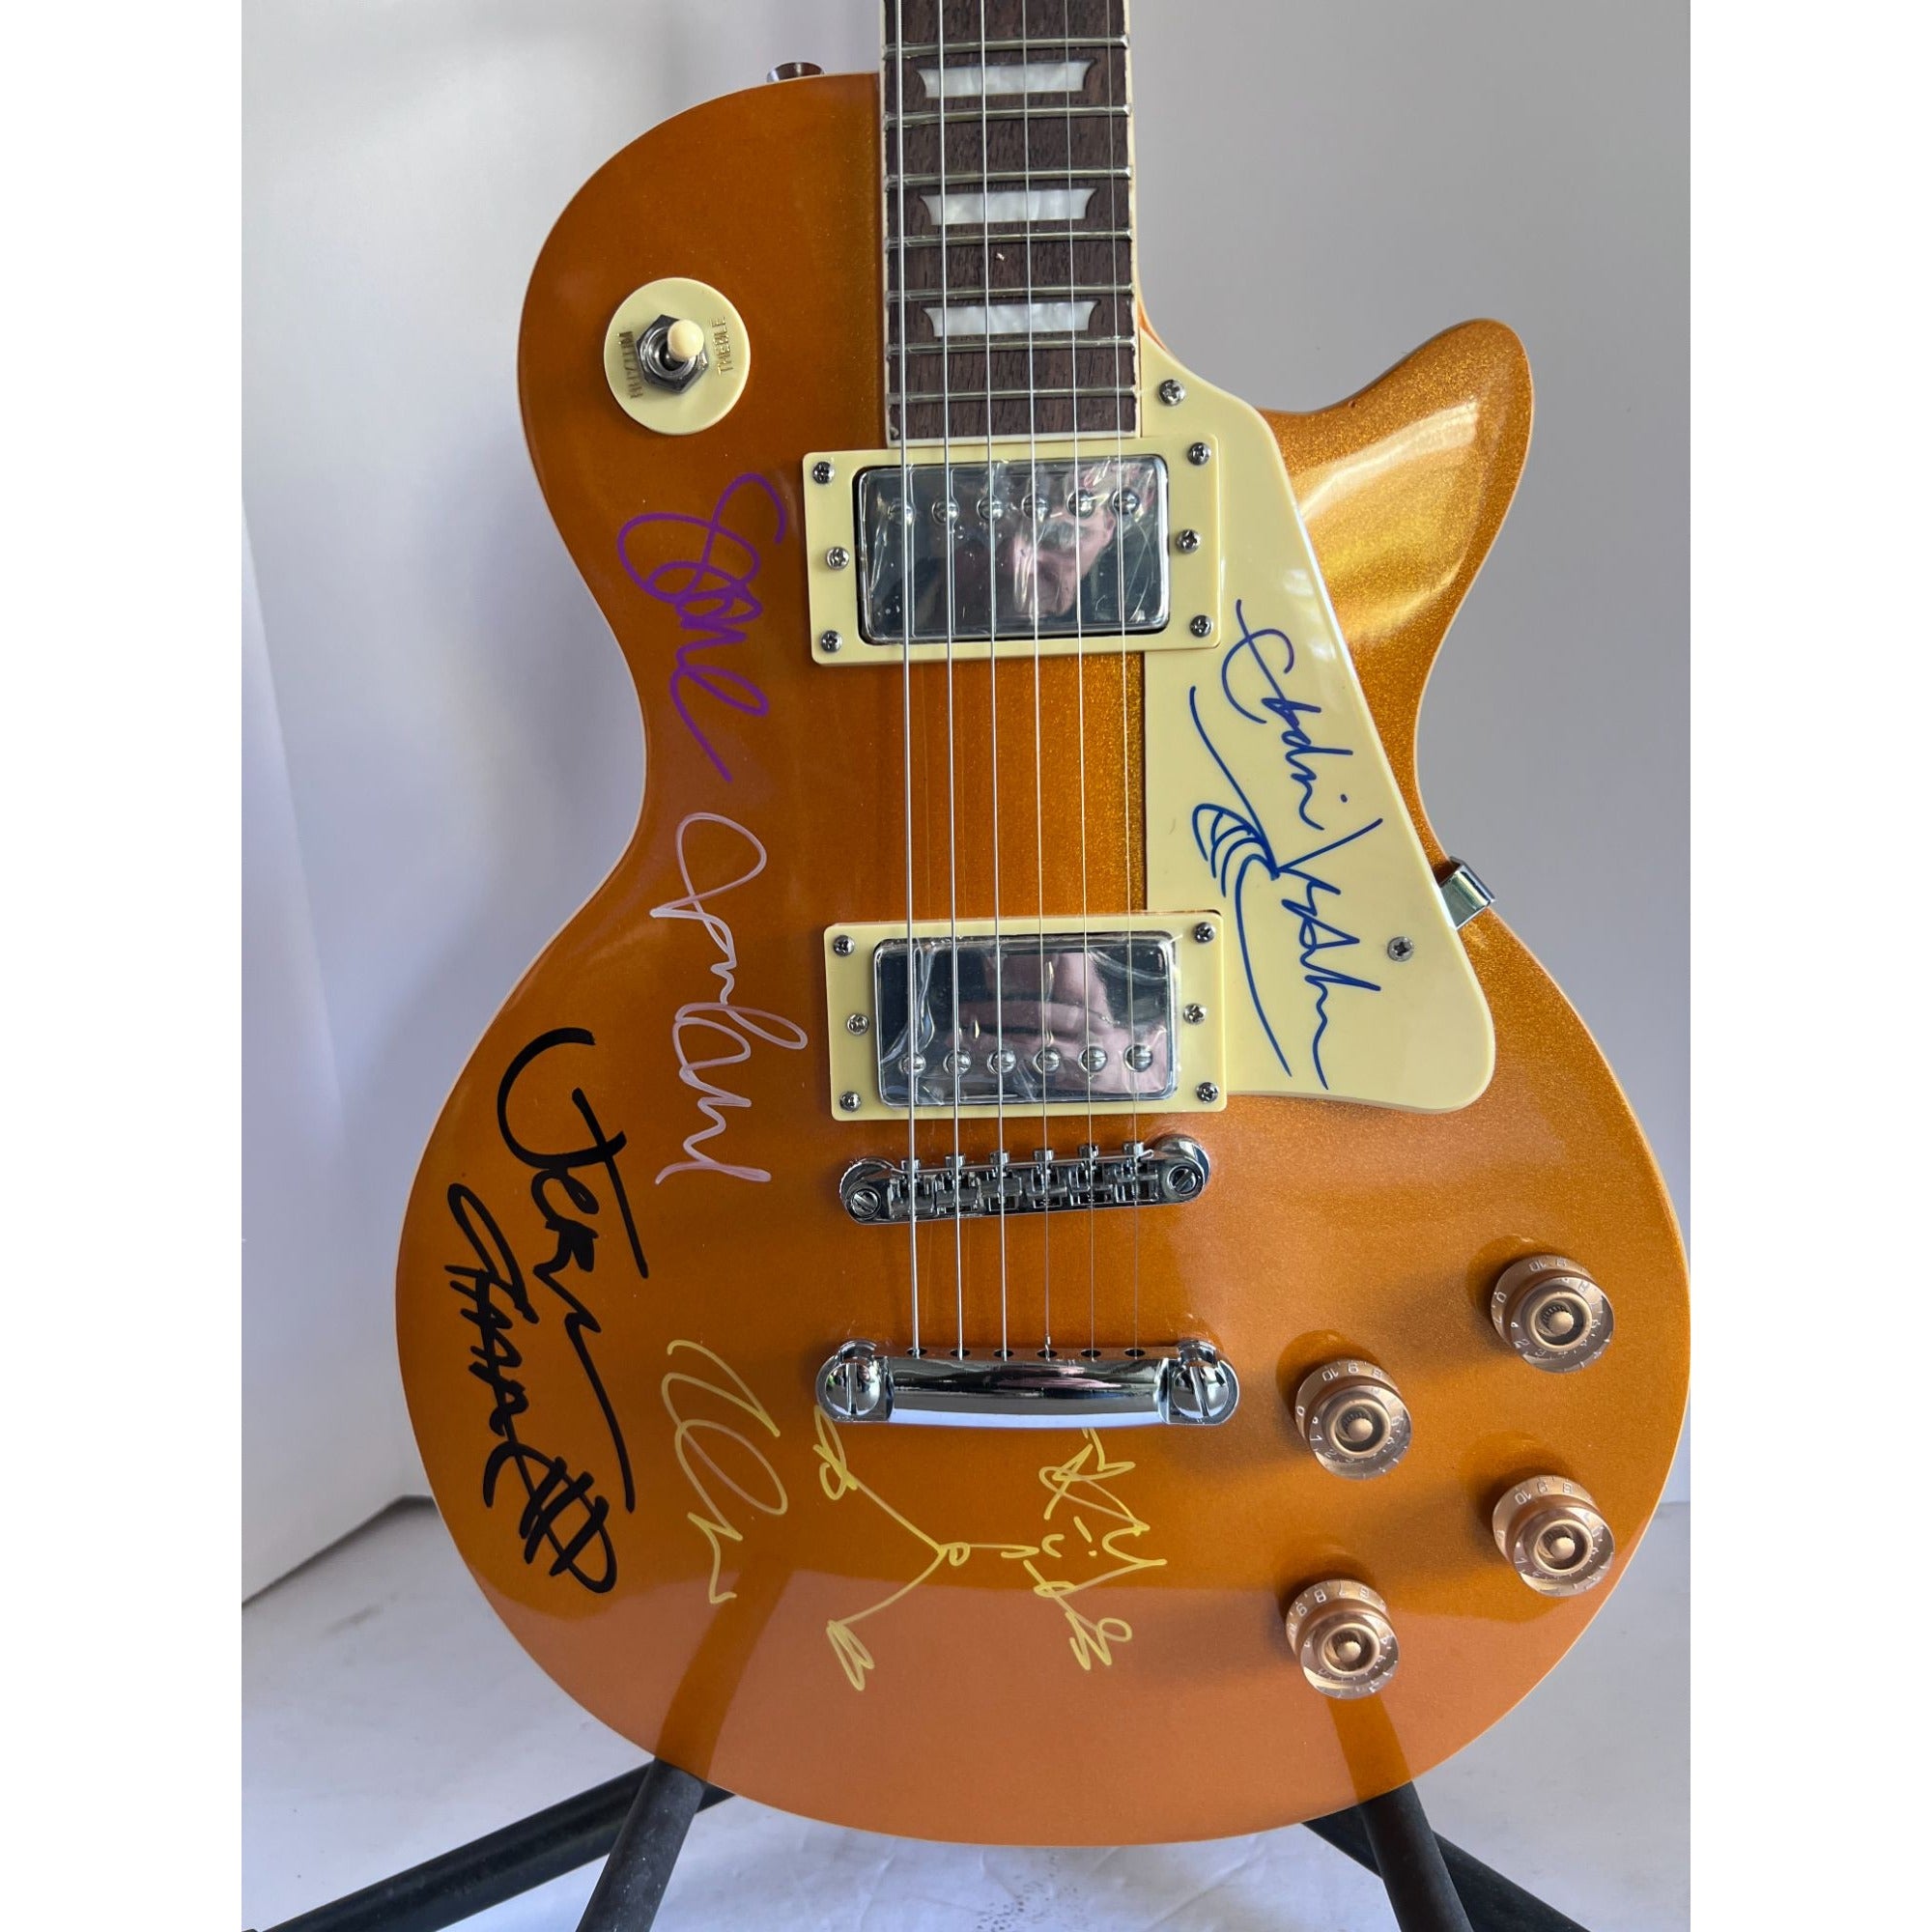 Pearl Jam Eddie Vedder Jeff Ament, Stone Gossard, Mike McCready, and Dave Abbruzzese Les Paul electric guitar signed with proof